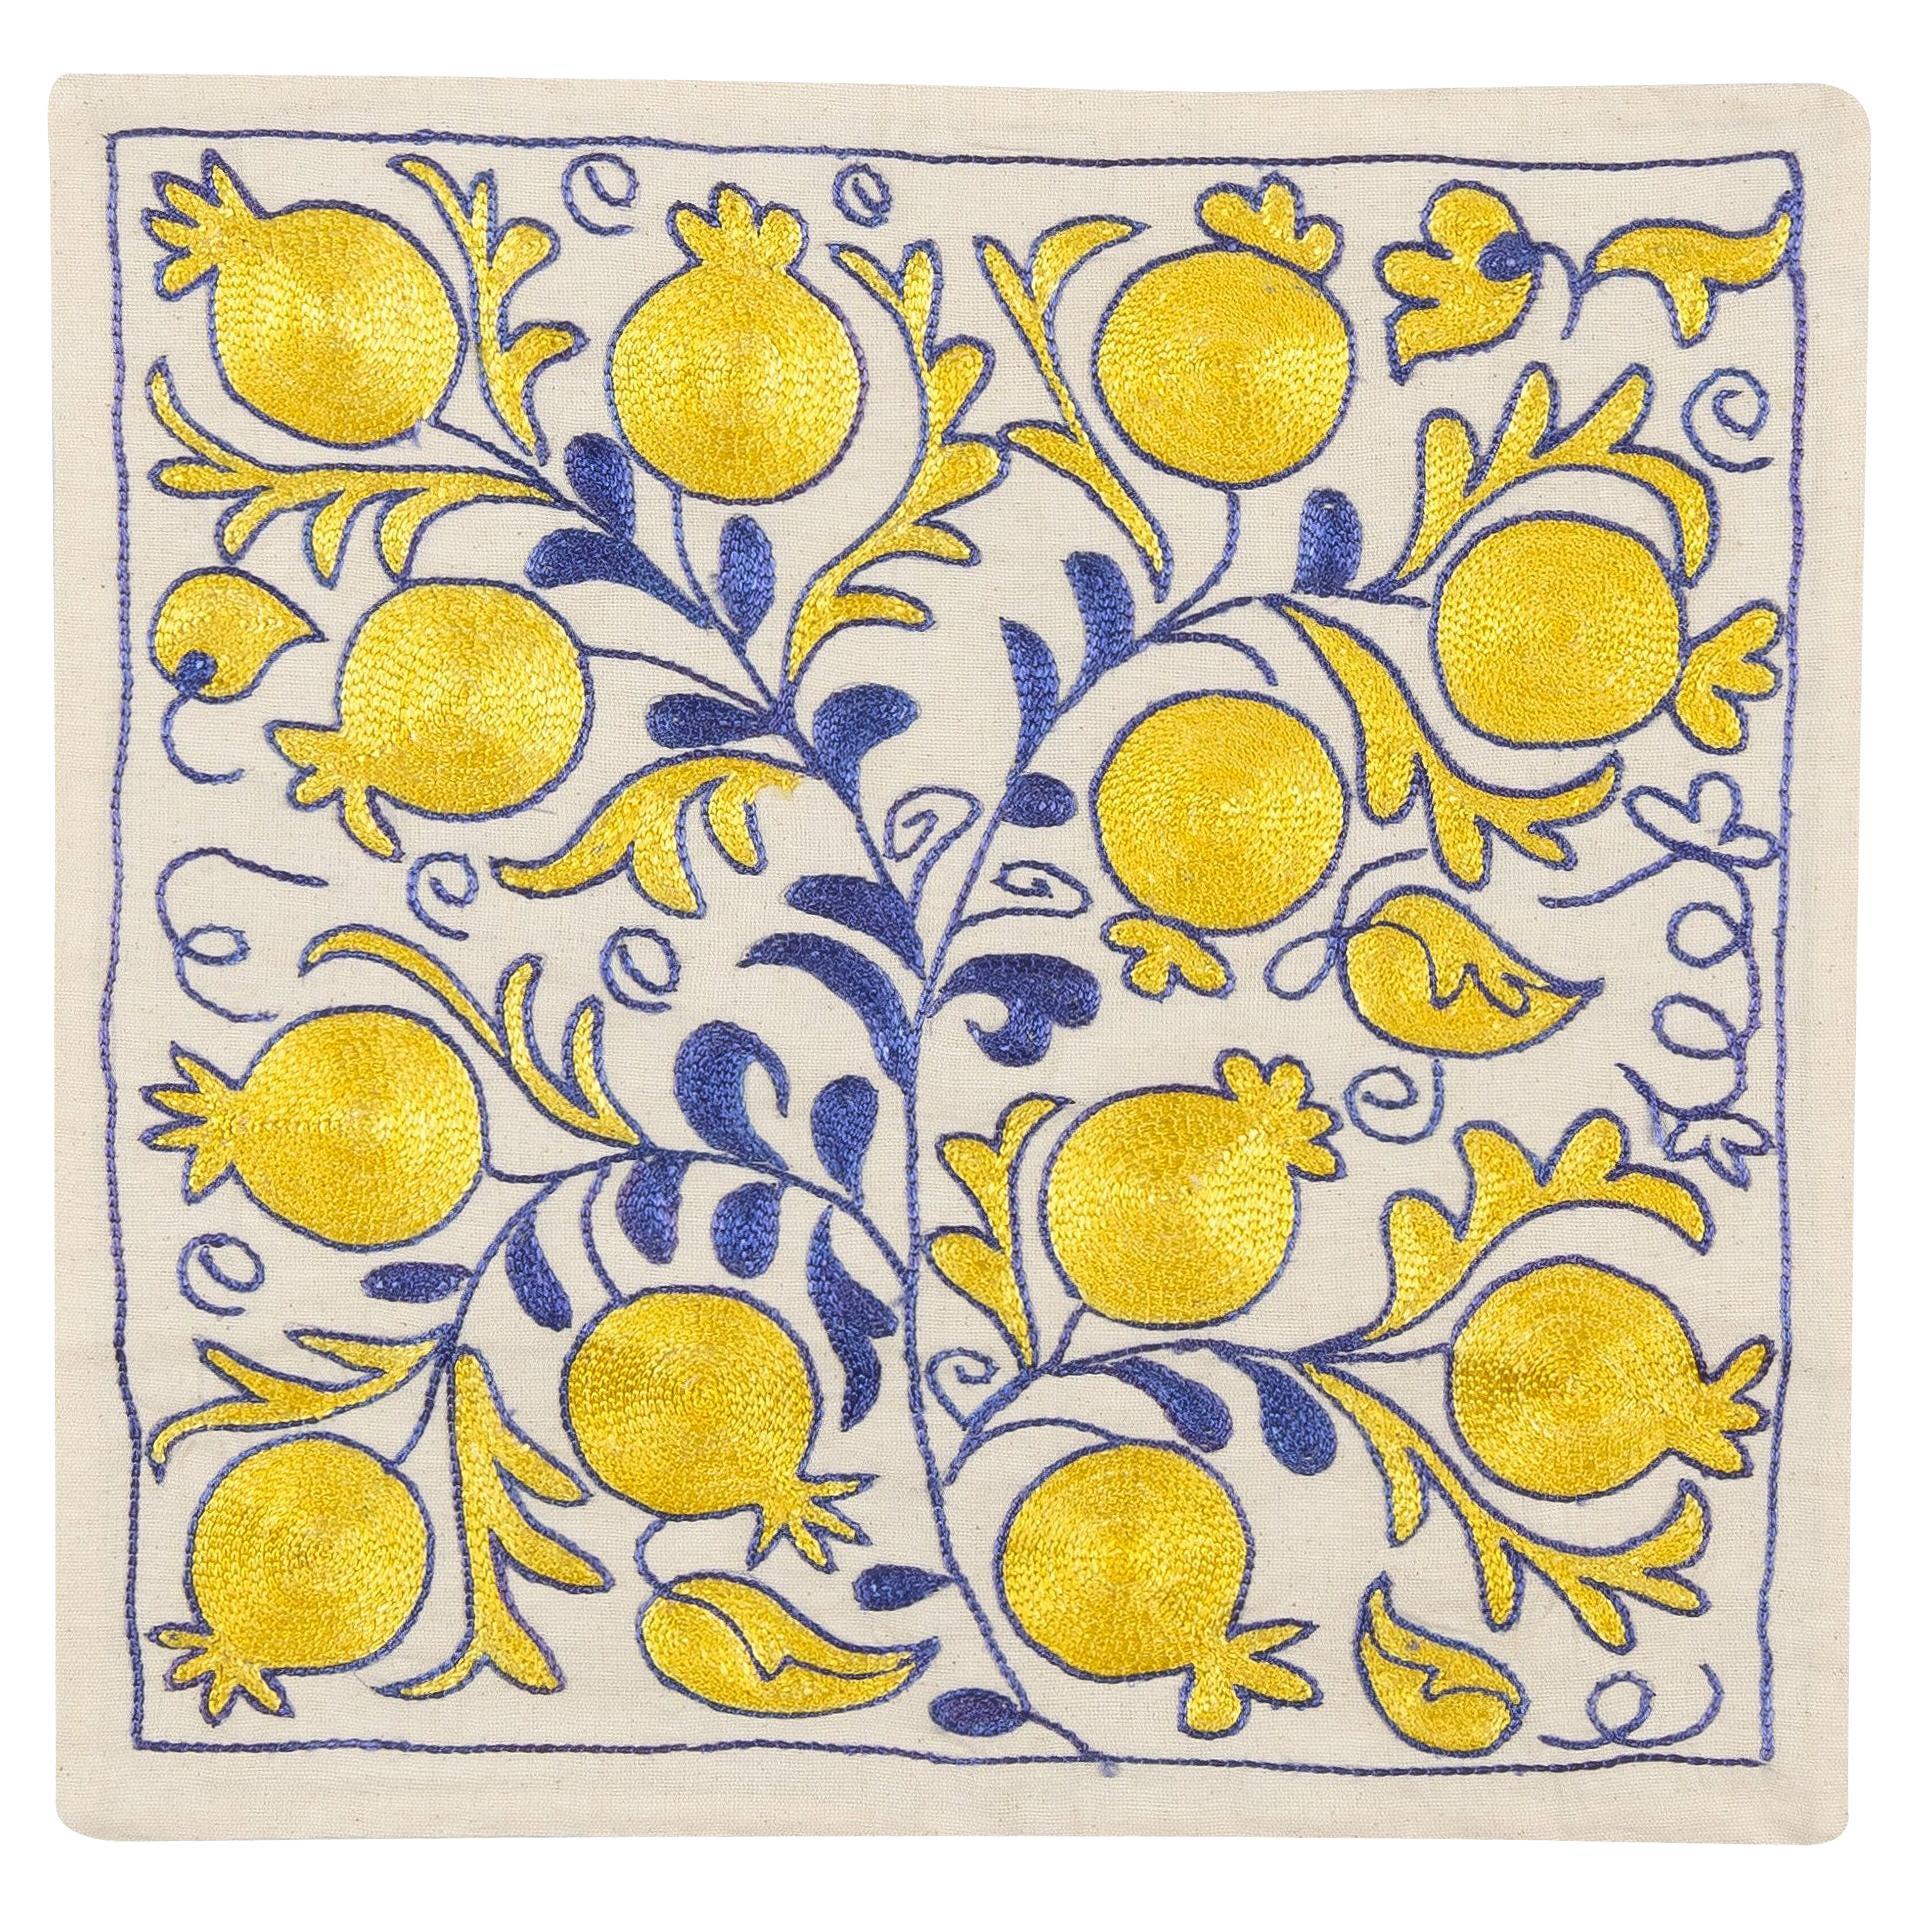 19"x19" Modern Silk Embroidered Suzani Cushion Cover in Ivory, Yellow & Blue